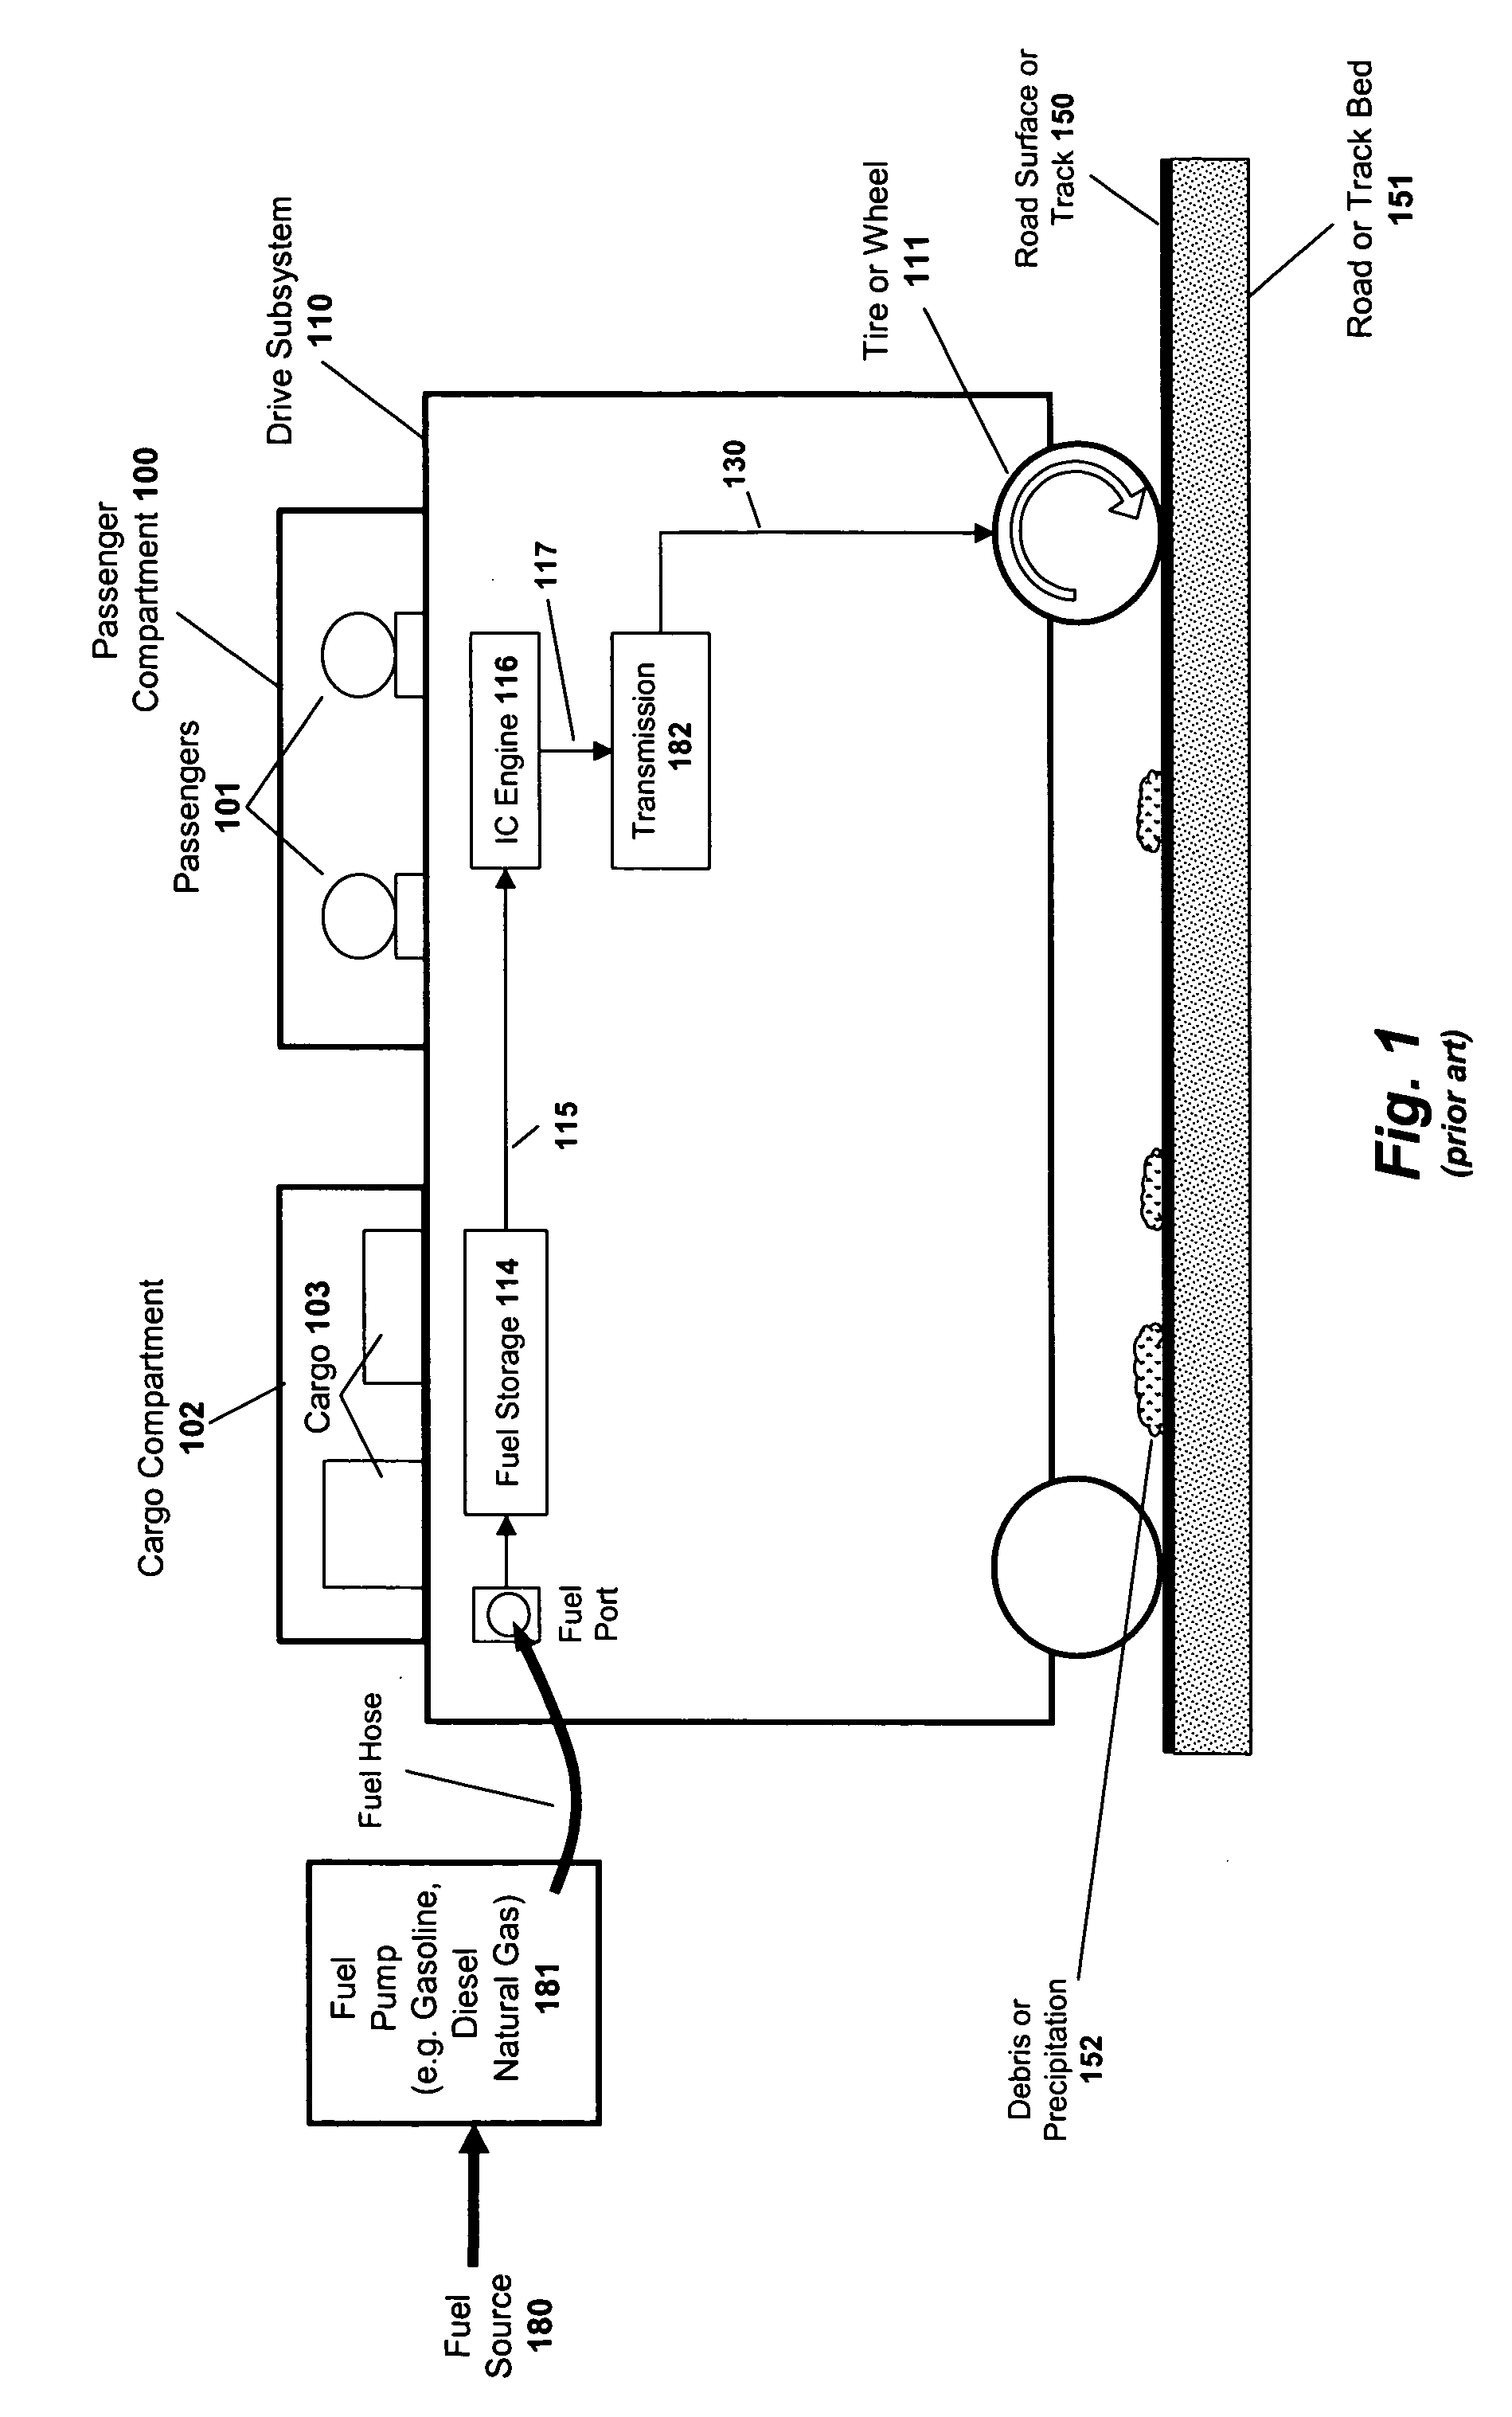 System and method for powering an aircraft using radio frequency signals and feedback